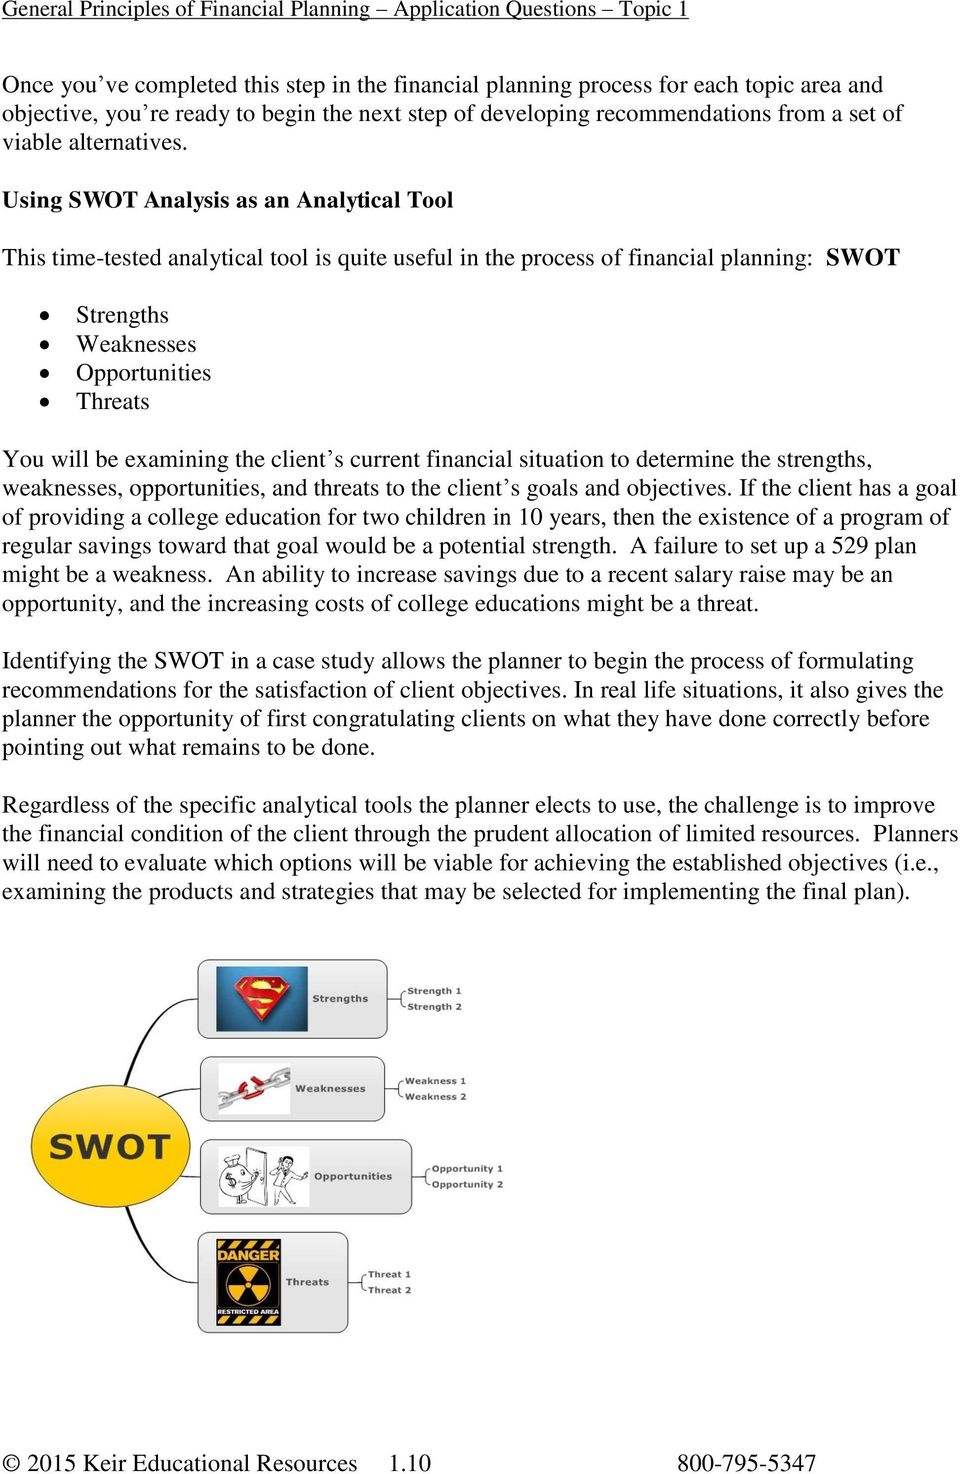 Using SWOT Analysis as an Analytical Tool This time-tested analytical tool is quite useful in the process of financial planning: SWOT Strengths Weaknesses Opportunities Threats You will be examining